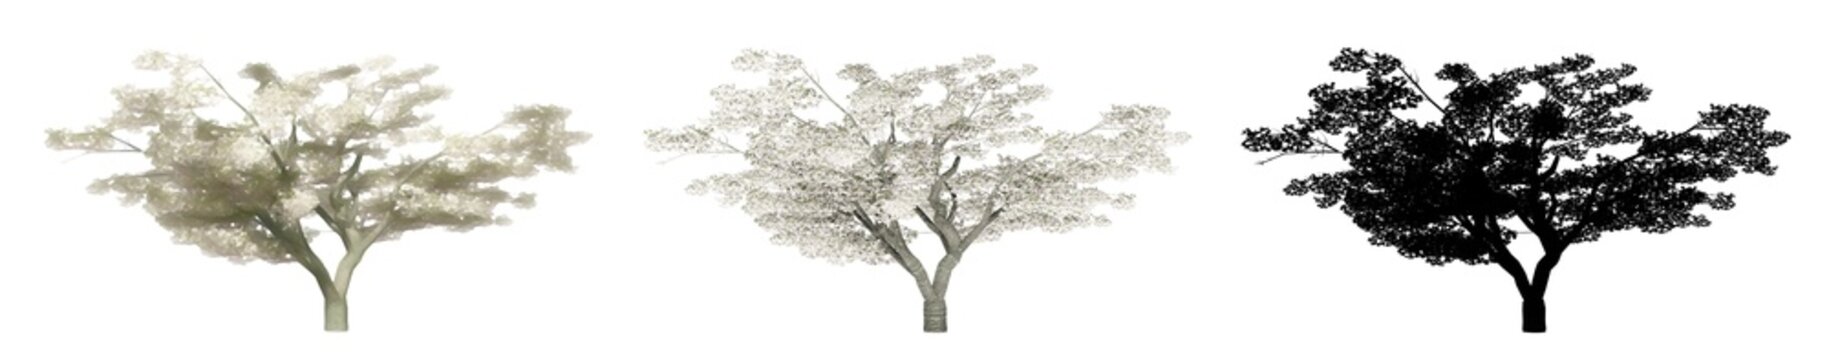 Set or collection of Cherry trees, painted, natural and as a black silhouette on white background. Concept or conceptual 3d illustration for nature, ecology and conservation, strength